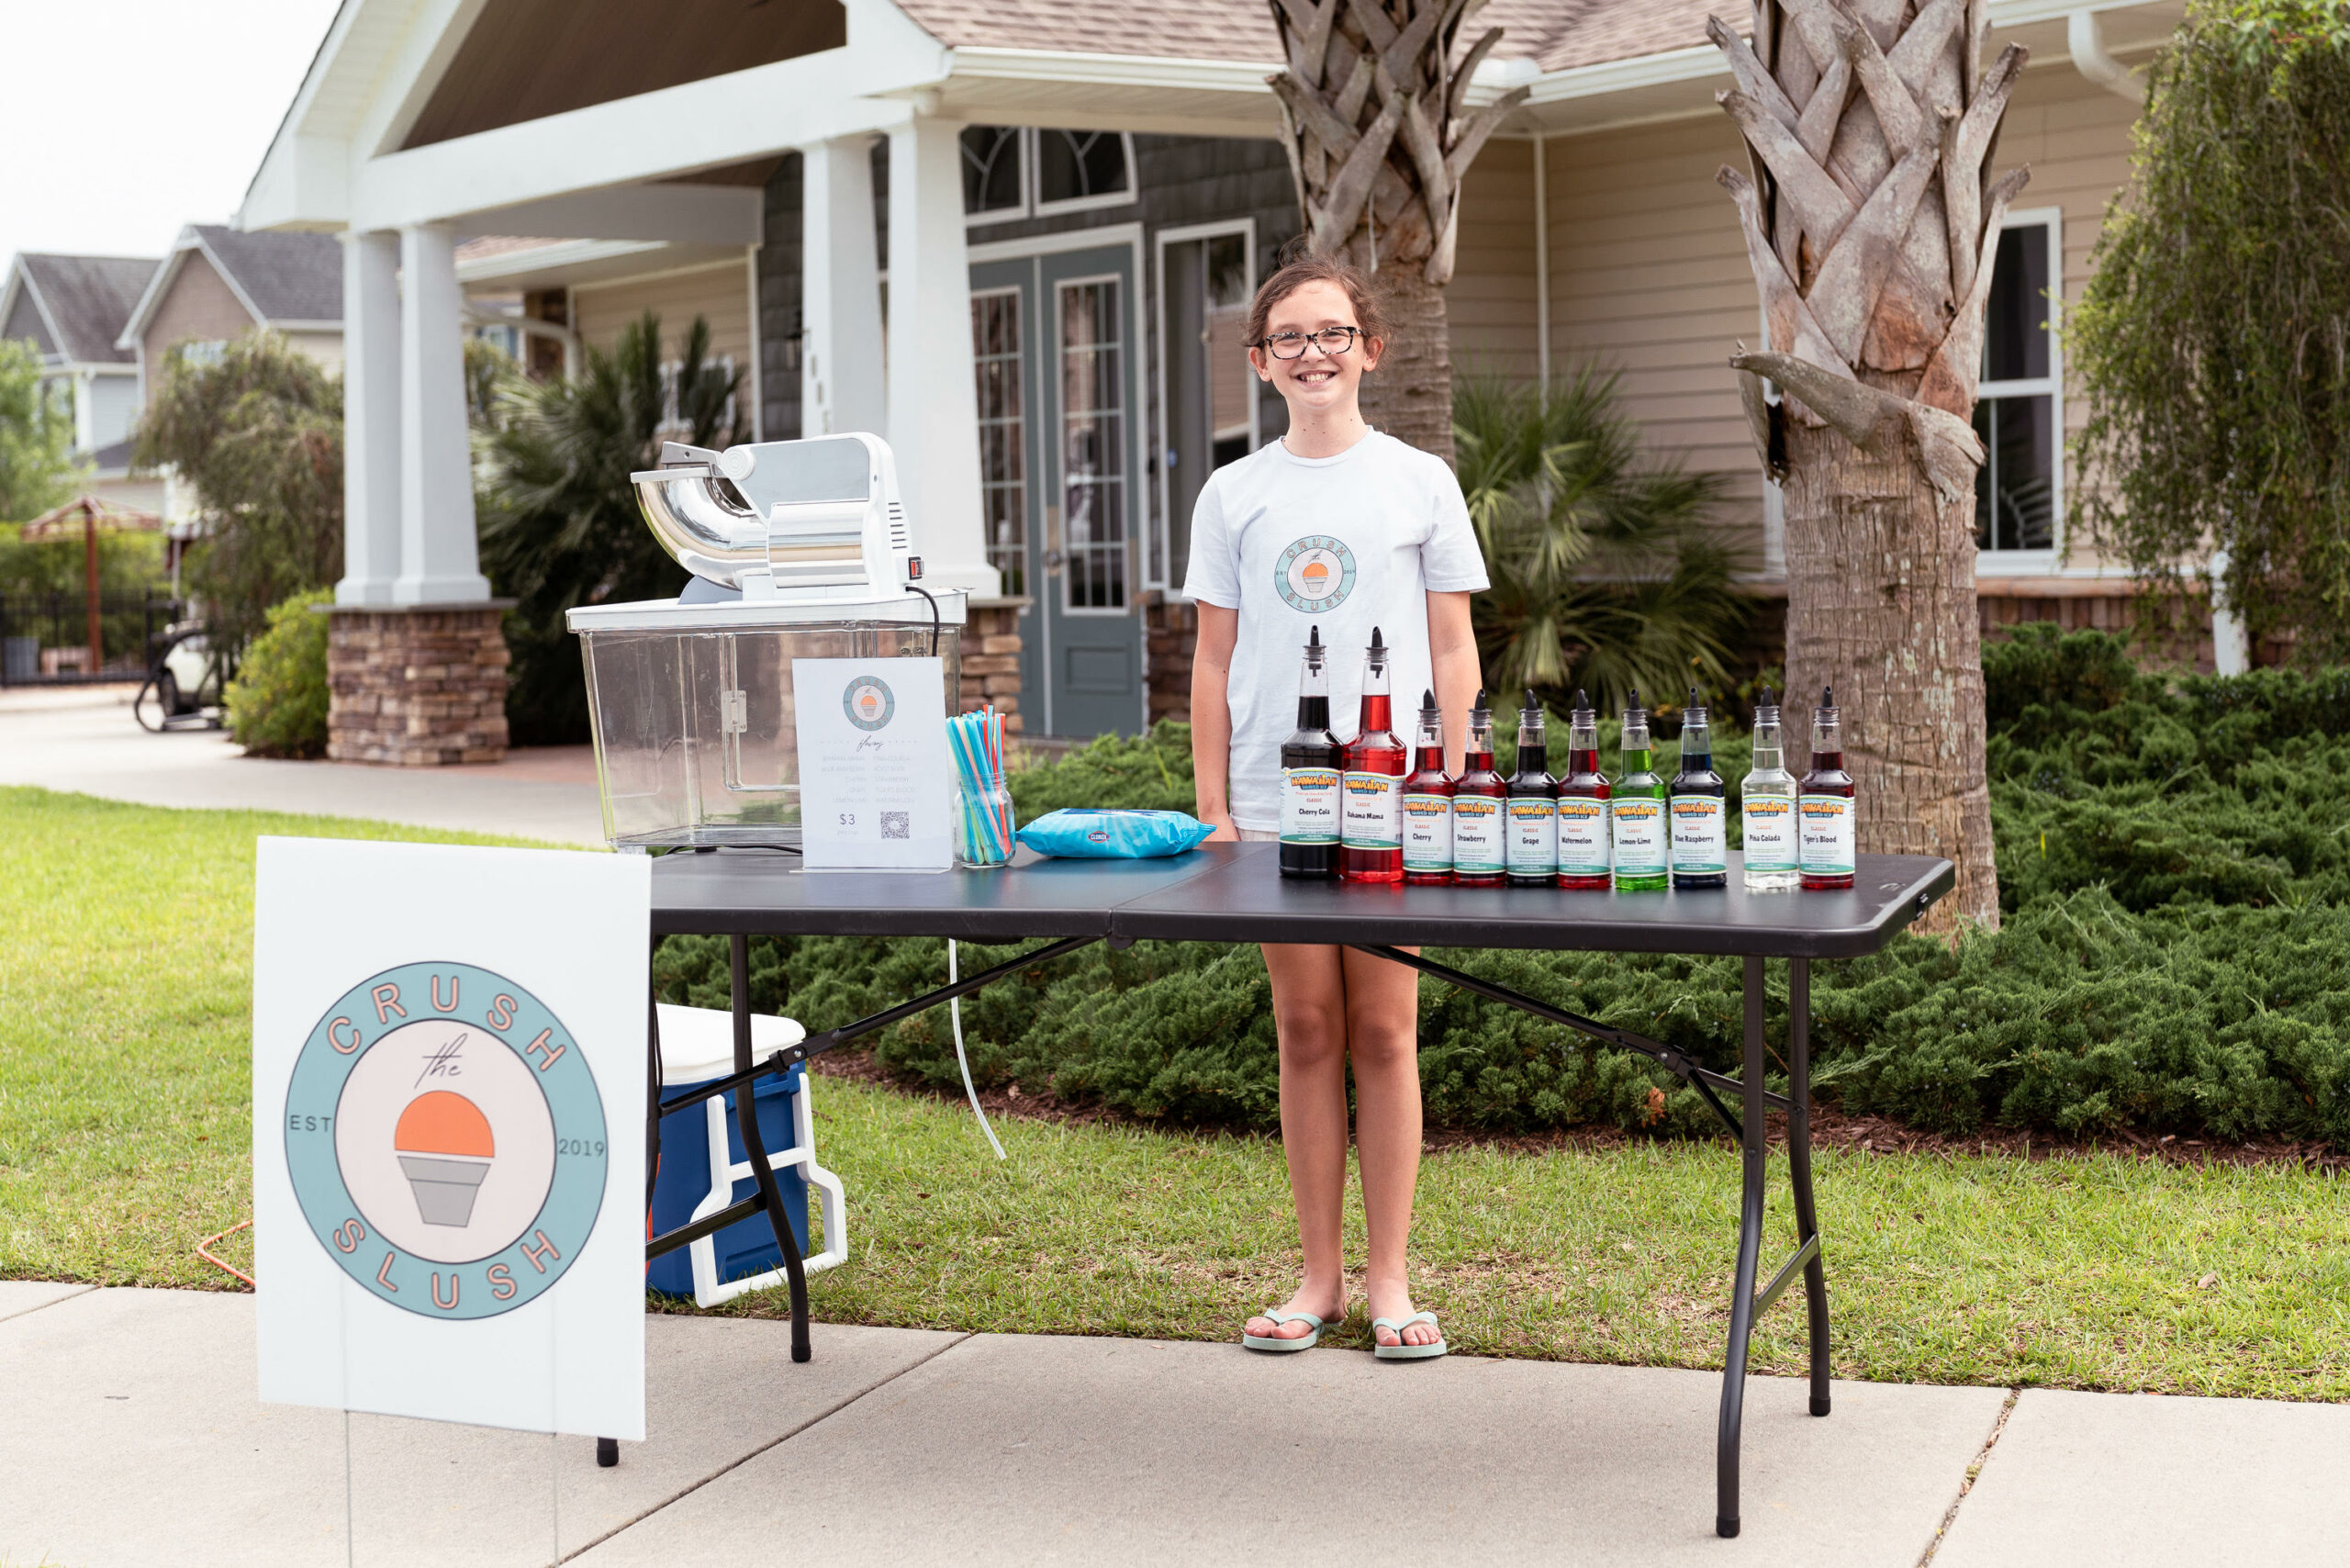 A smiling young girl stands behind a table loaded up with slushie making supplies.